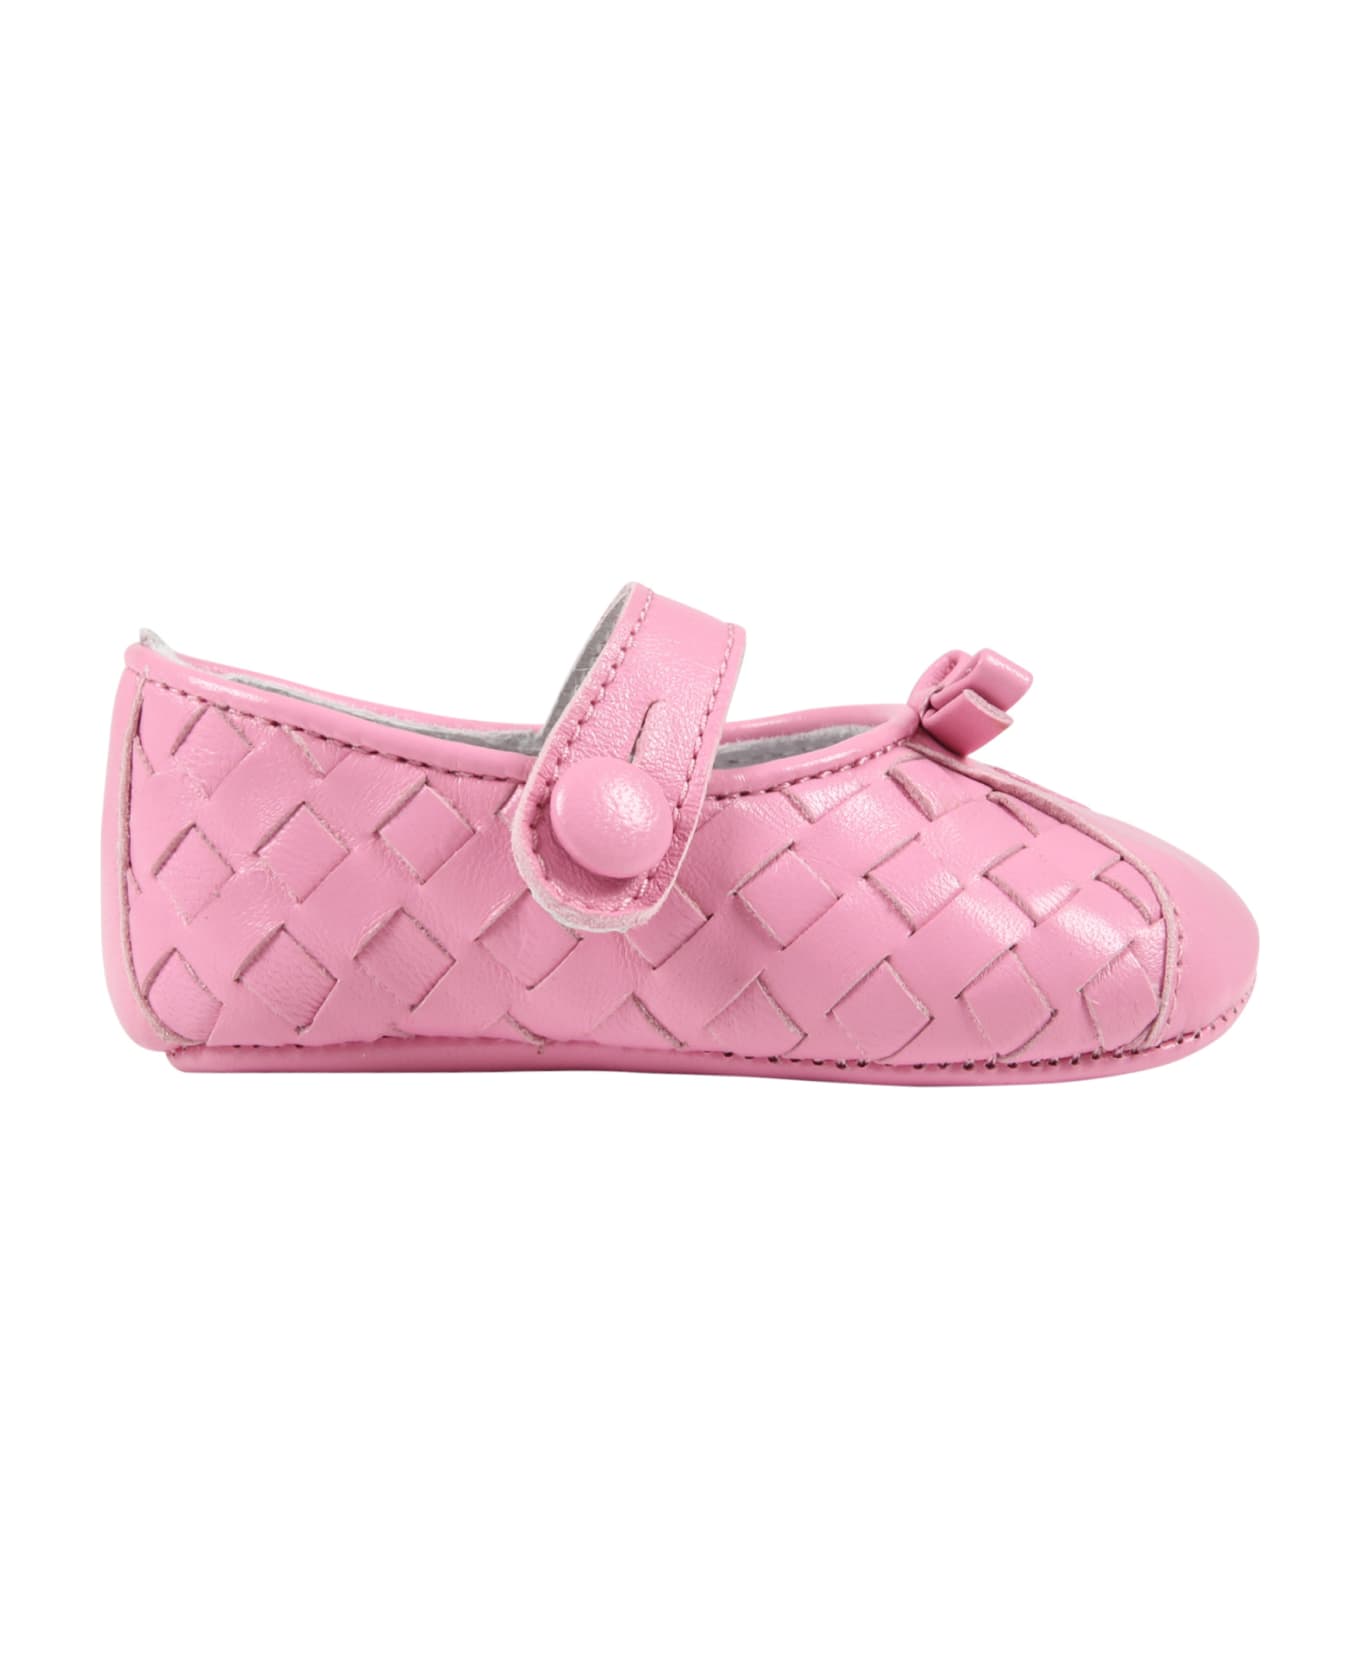 Gallucci Pink Ballet Flats For Baby Girl - Pink